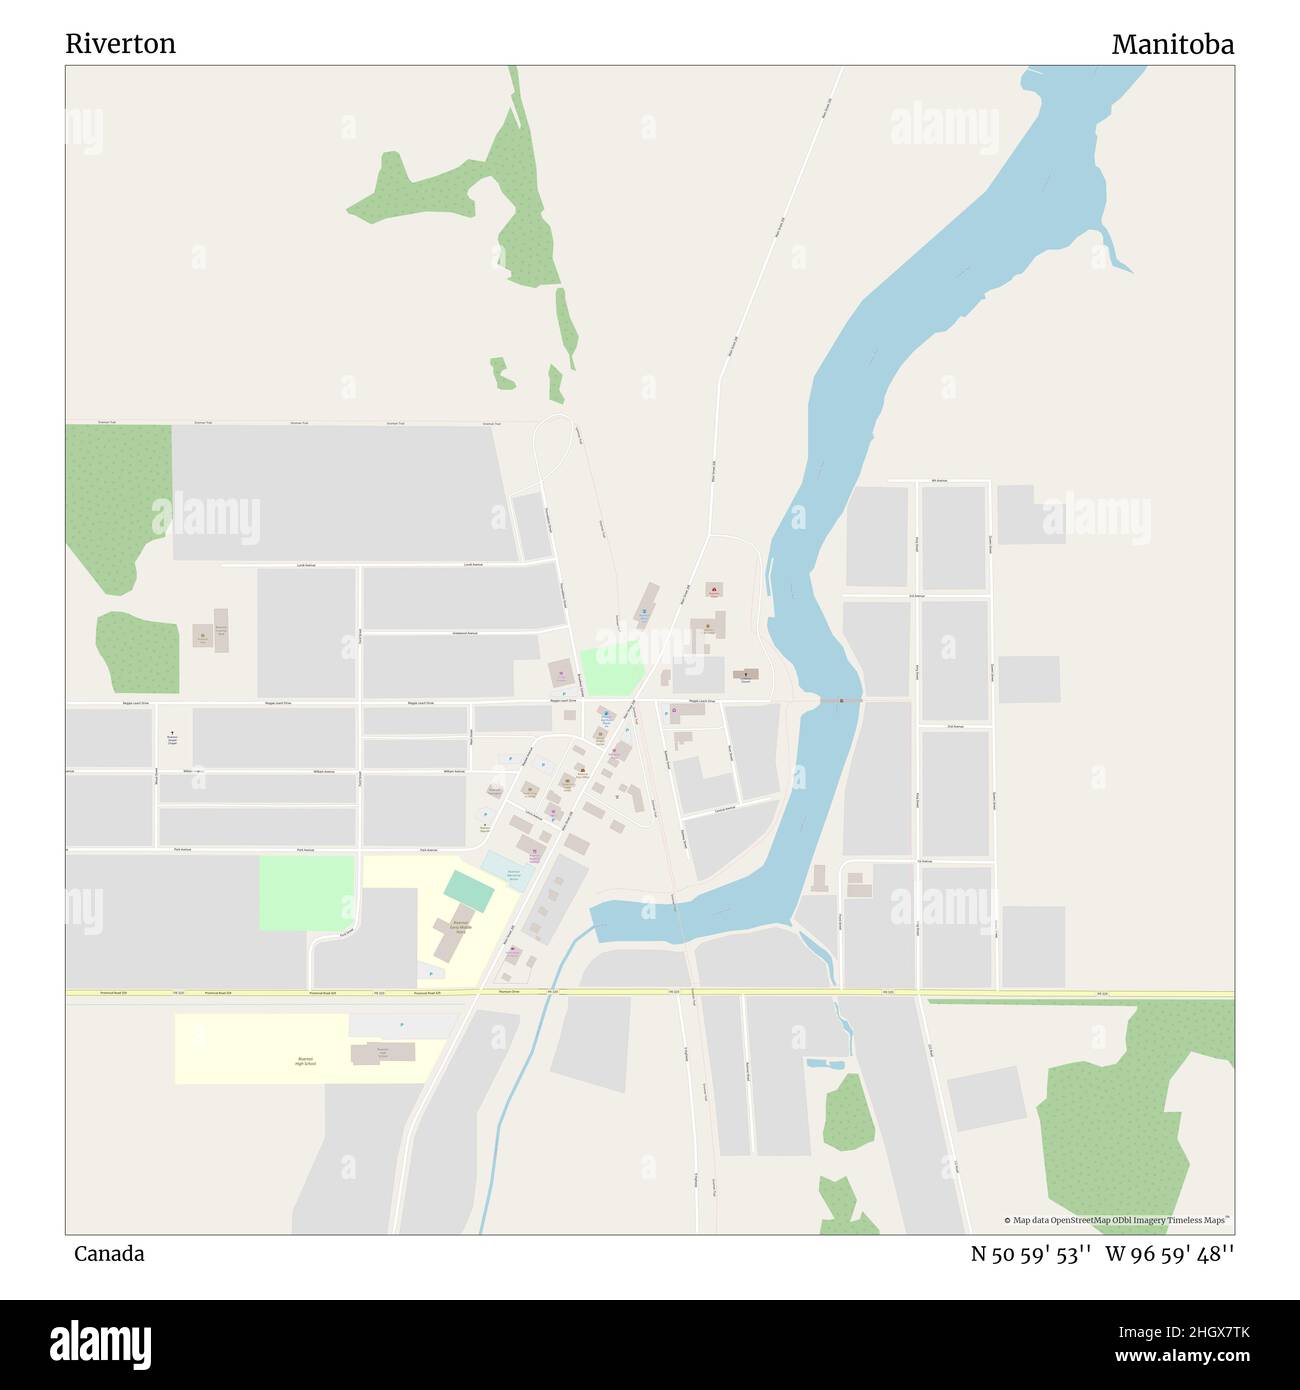 Riverton, Canada, Manitoba, N 50 59' 53'', W 96 59' 48'', map, Timeless Map published in 2021. Travelers, explorers and adventurers like Florence Nightingale, David Livingstone, Ernest Shackleton, Lewis and Clark and Sherlock Holmes relied on maps to plan travels to the world's most remote corners, Timeless Maps is mapping most locations on the globe, showing the achievement of great dreams Stock Photo